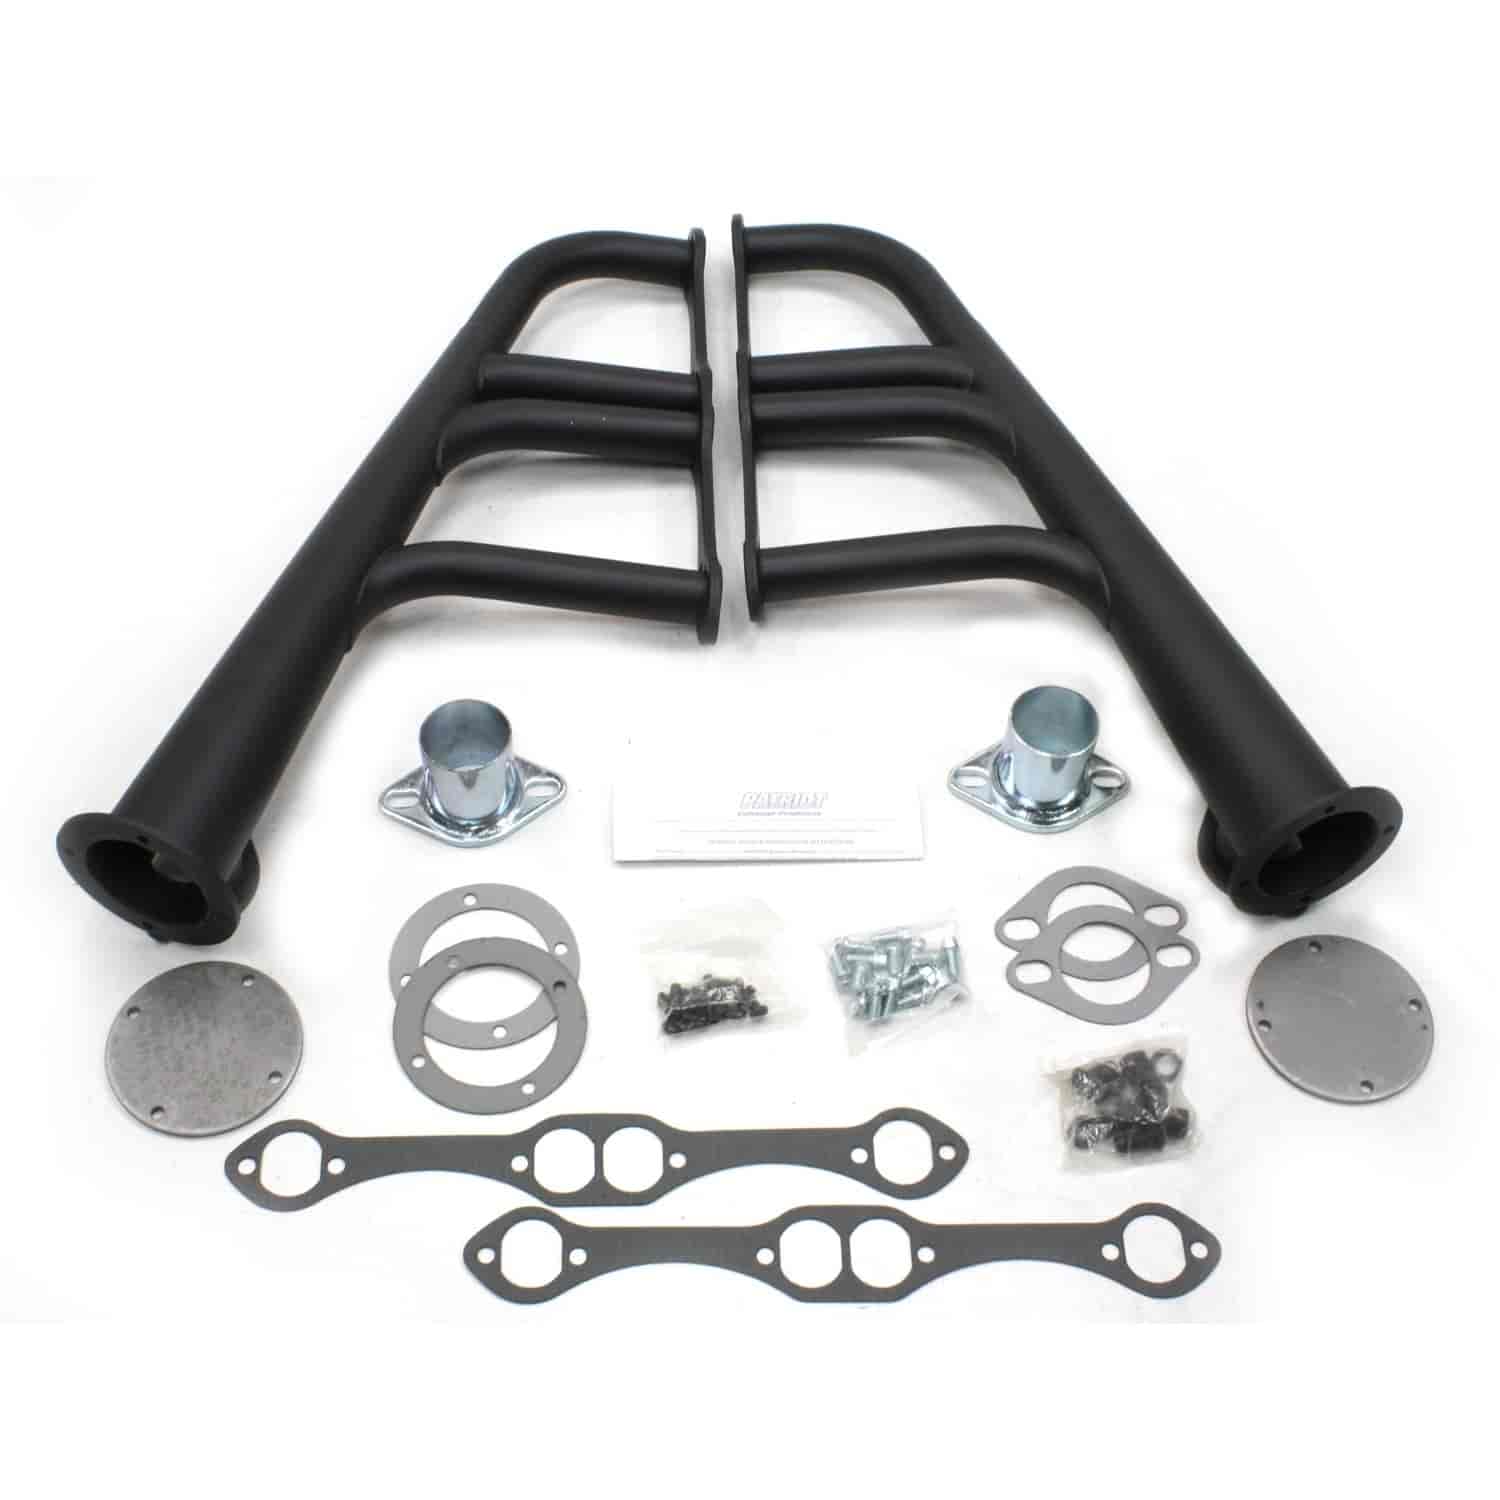 Lakester Headers Small Block Chevy 265-400 (Oval Ports)